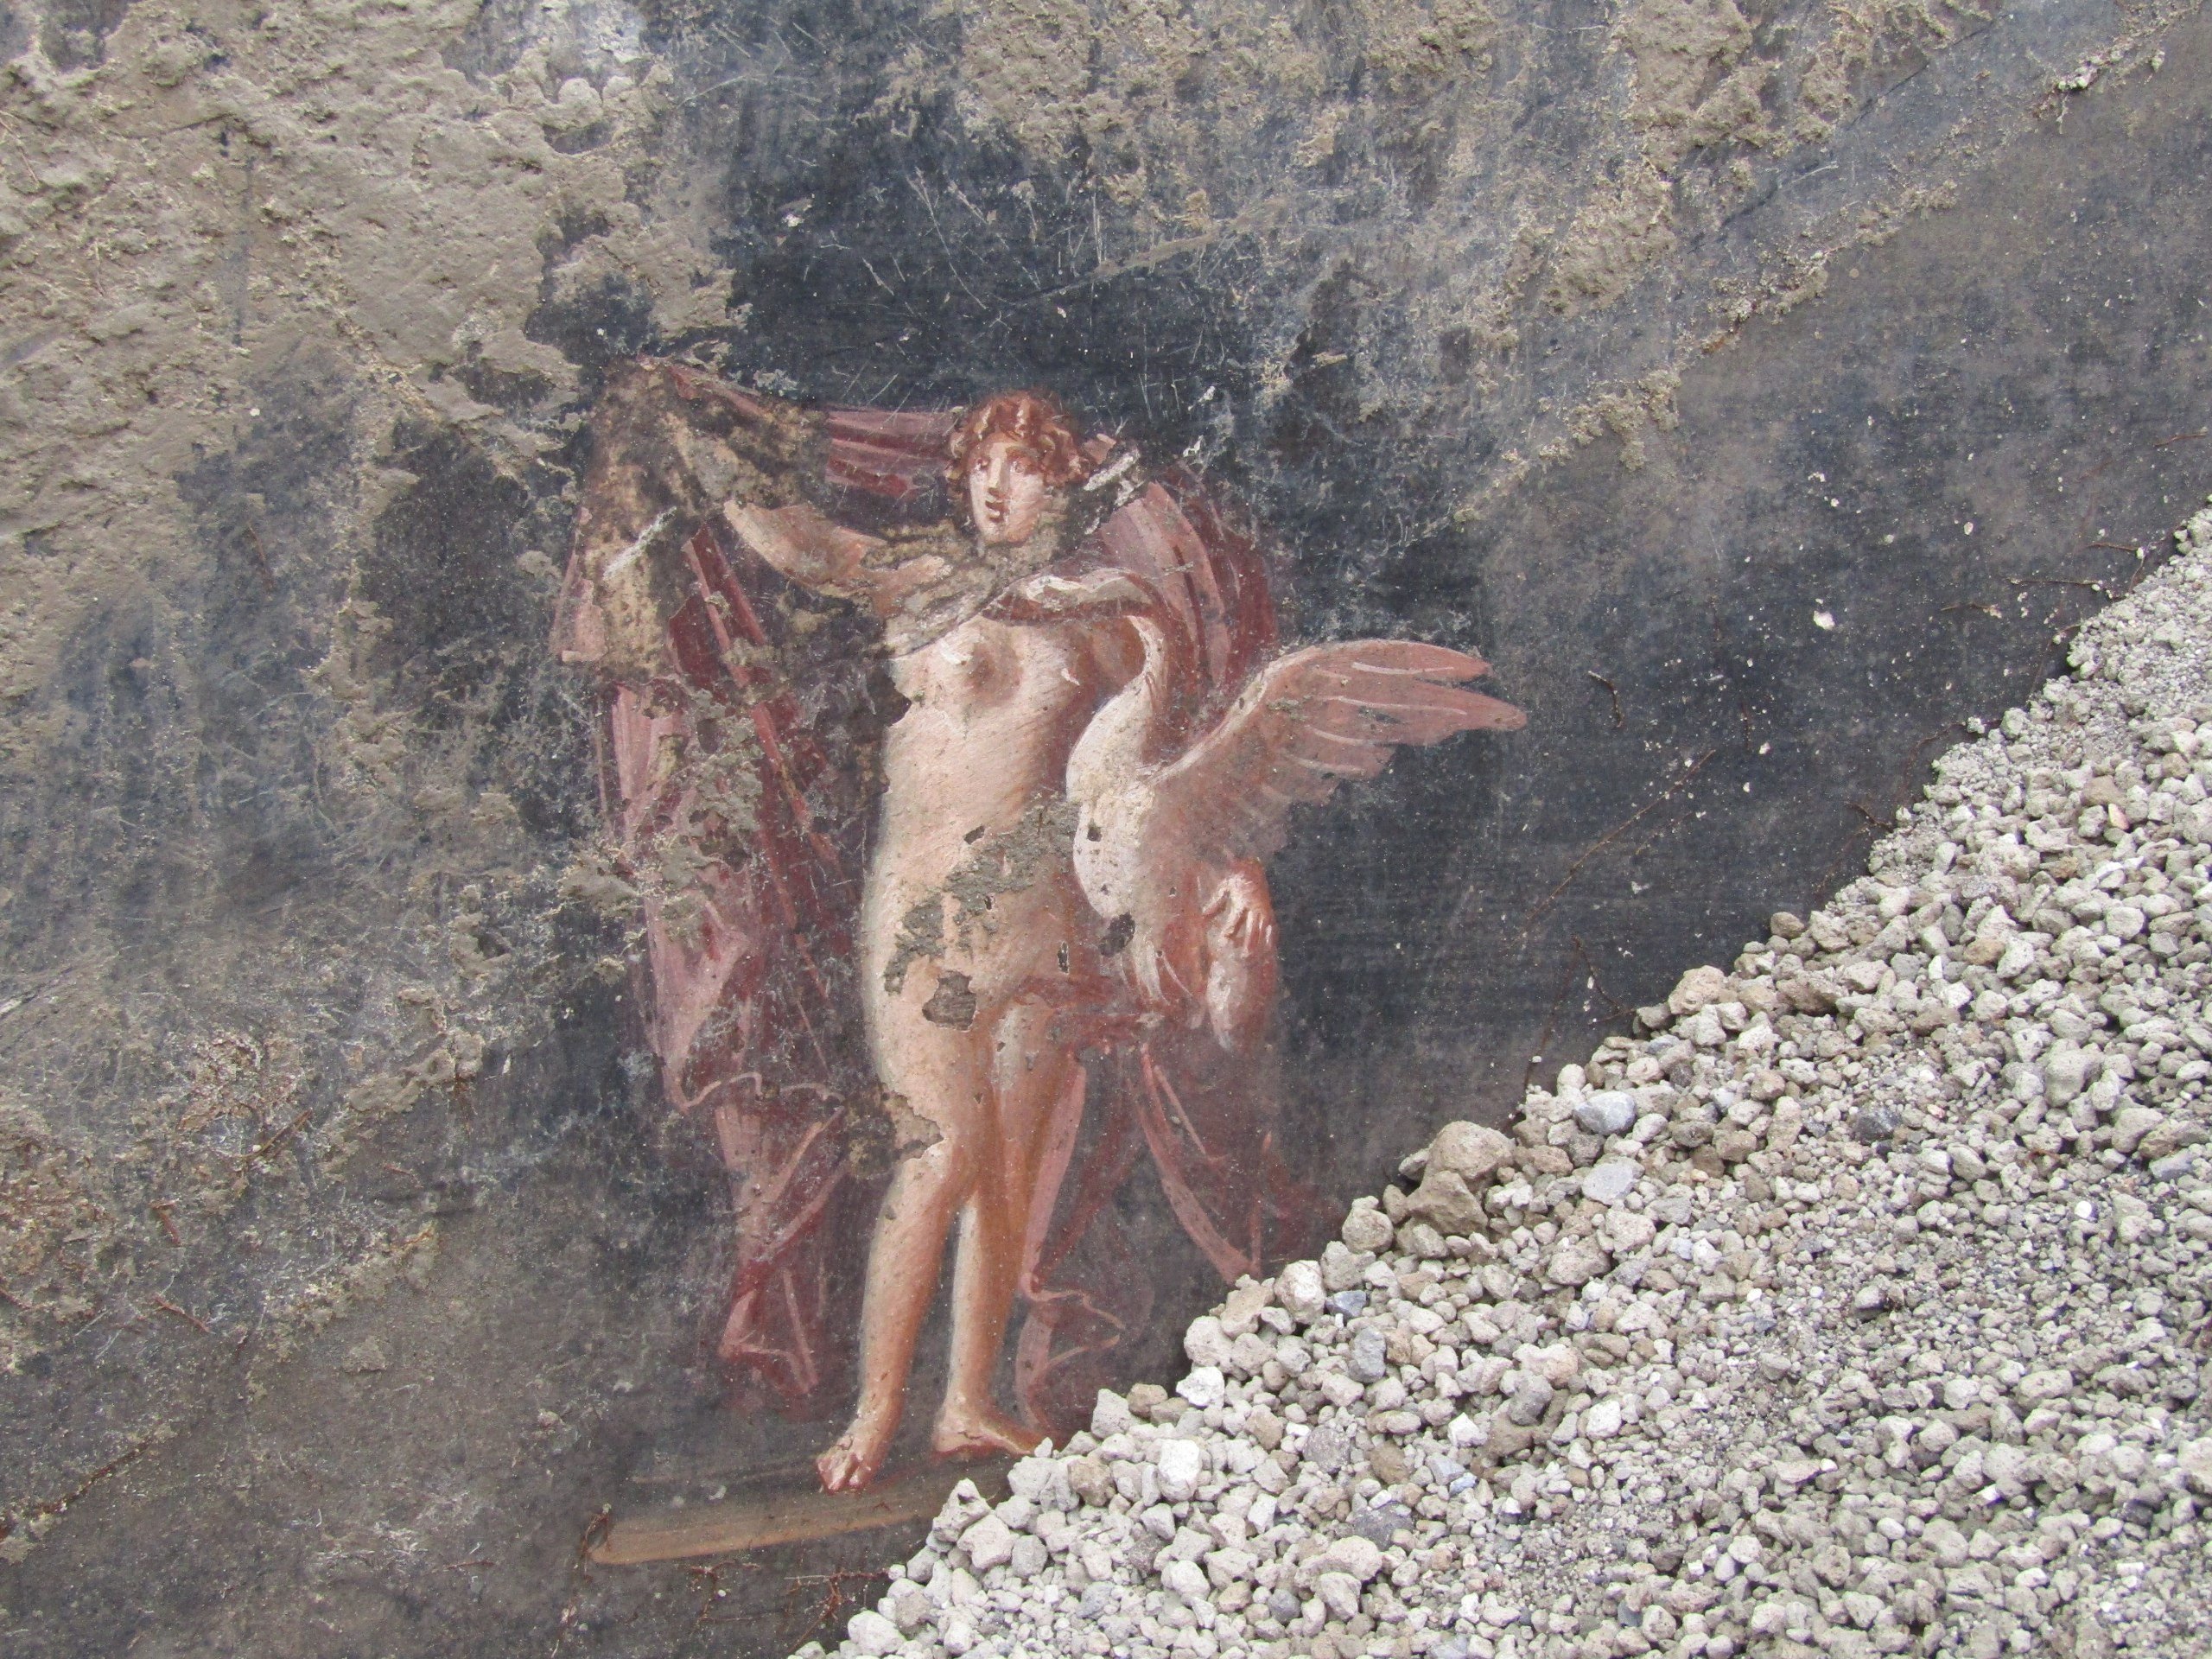 A fresco of a mythological character inspired by the Trojan War at the ancient archaeological site of Pompeii, Italy. Photo: Reuters